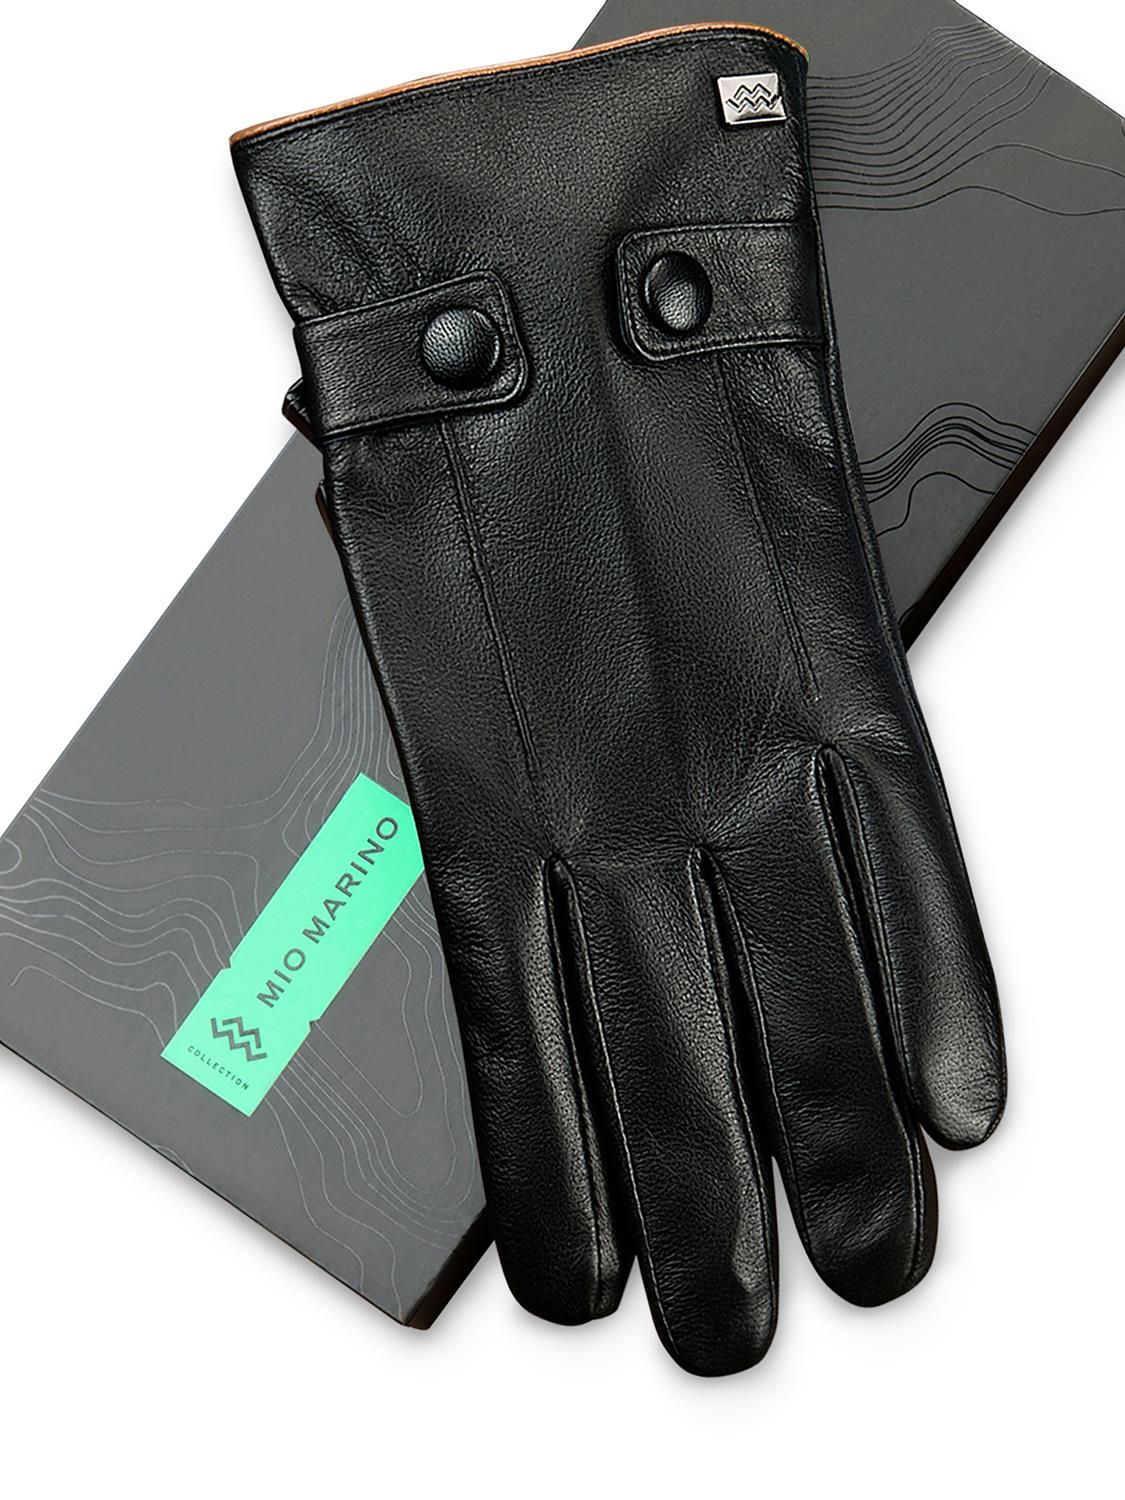 Sheepskin Leather Touchscreen Gloves | Lord & Taylor